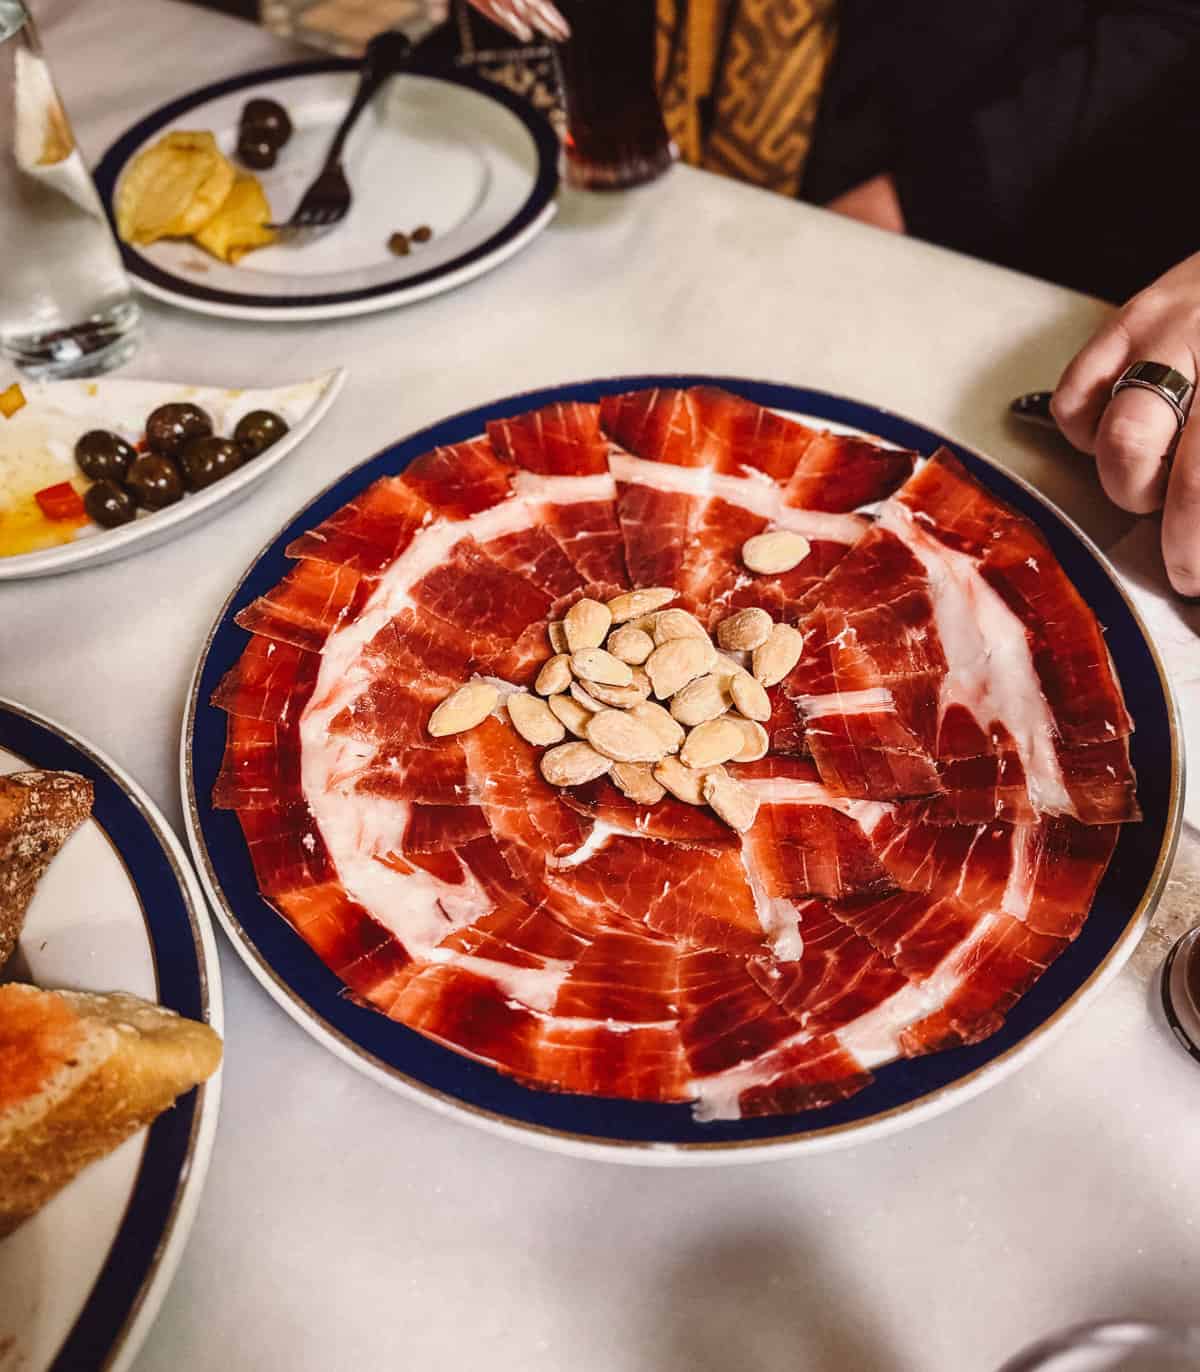 A large, round plate filled with thinly sliced jamón ibérico garnished with a pile of almonds in the center, partially surrounded by other tapas dishes, showcasing a vibrant dining setting.